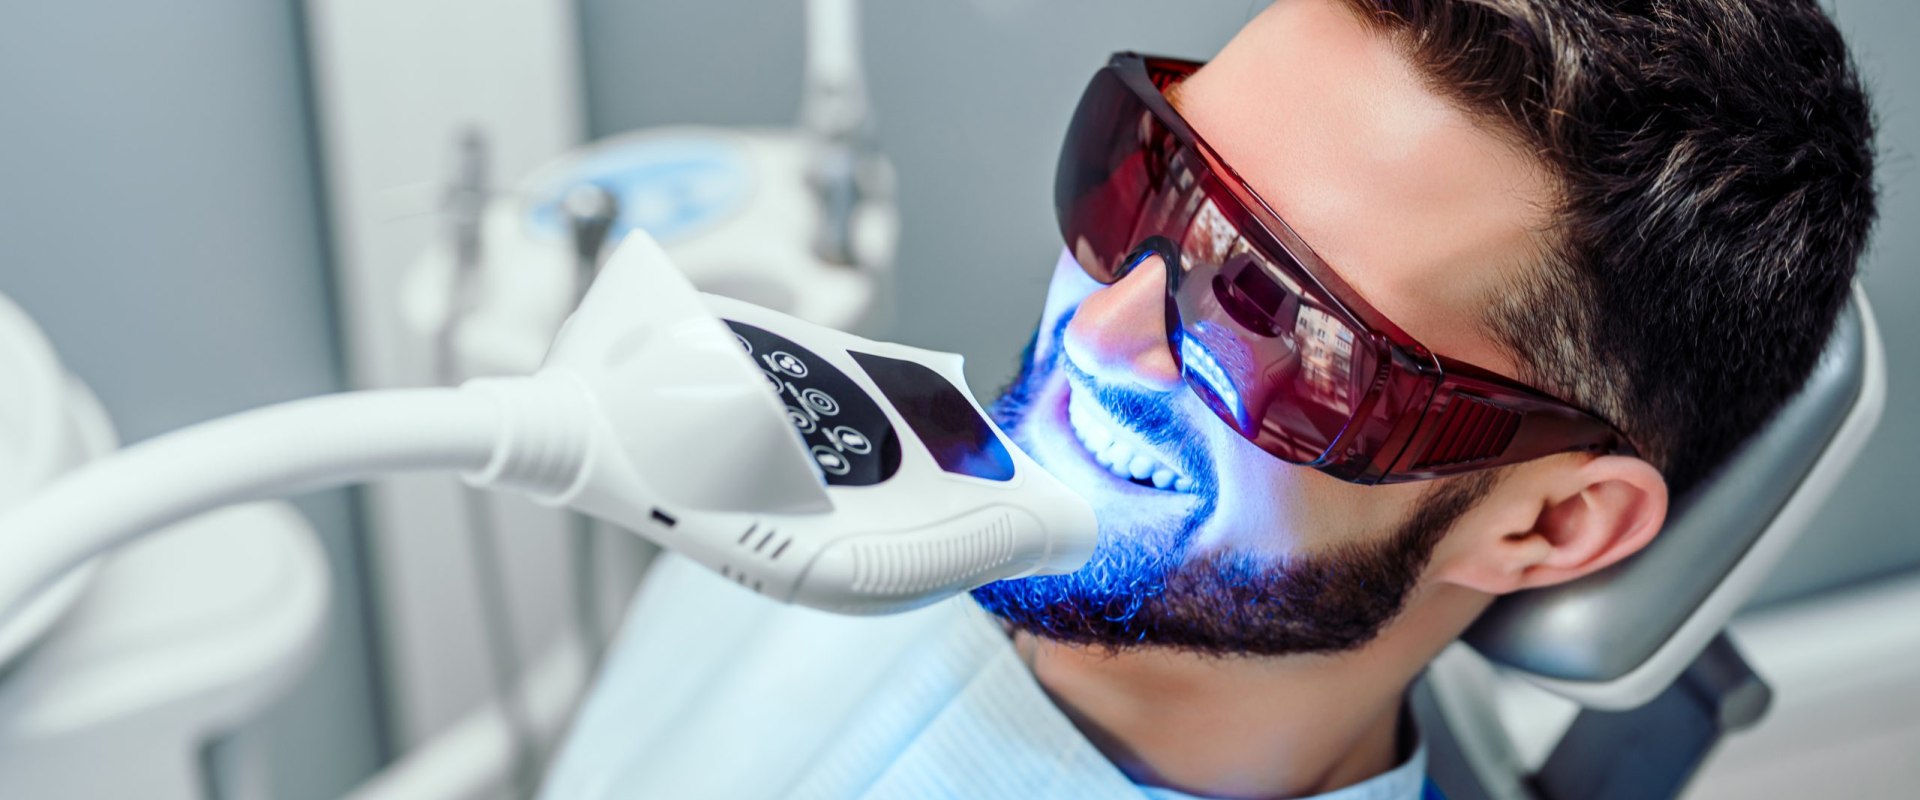 How to Maintain a Youthful Appearance: The Benefits of Teeth Whitening